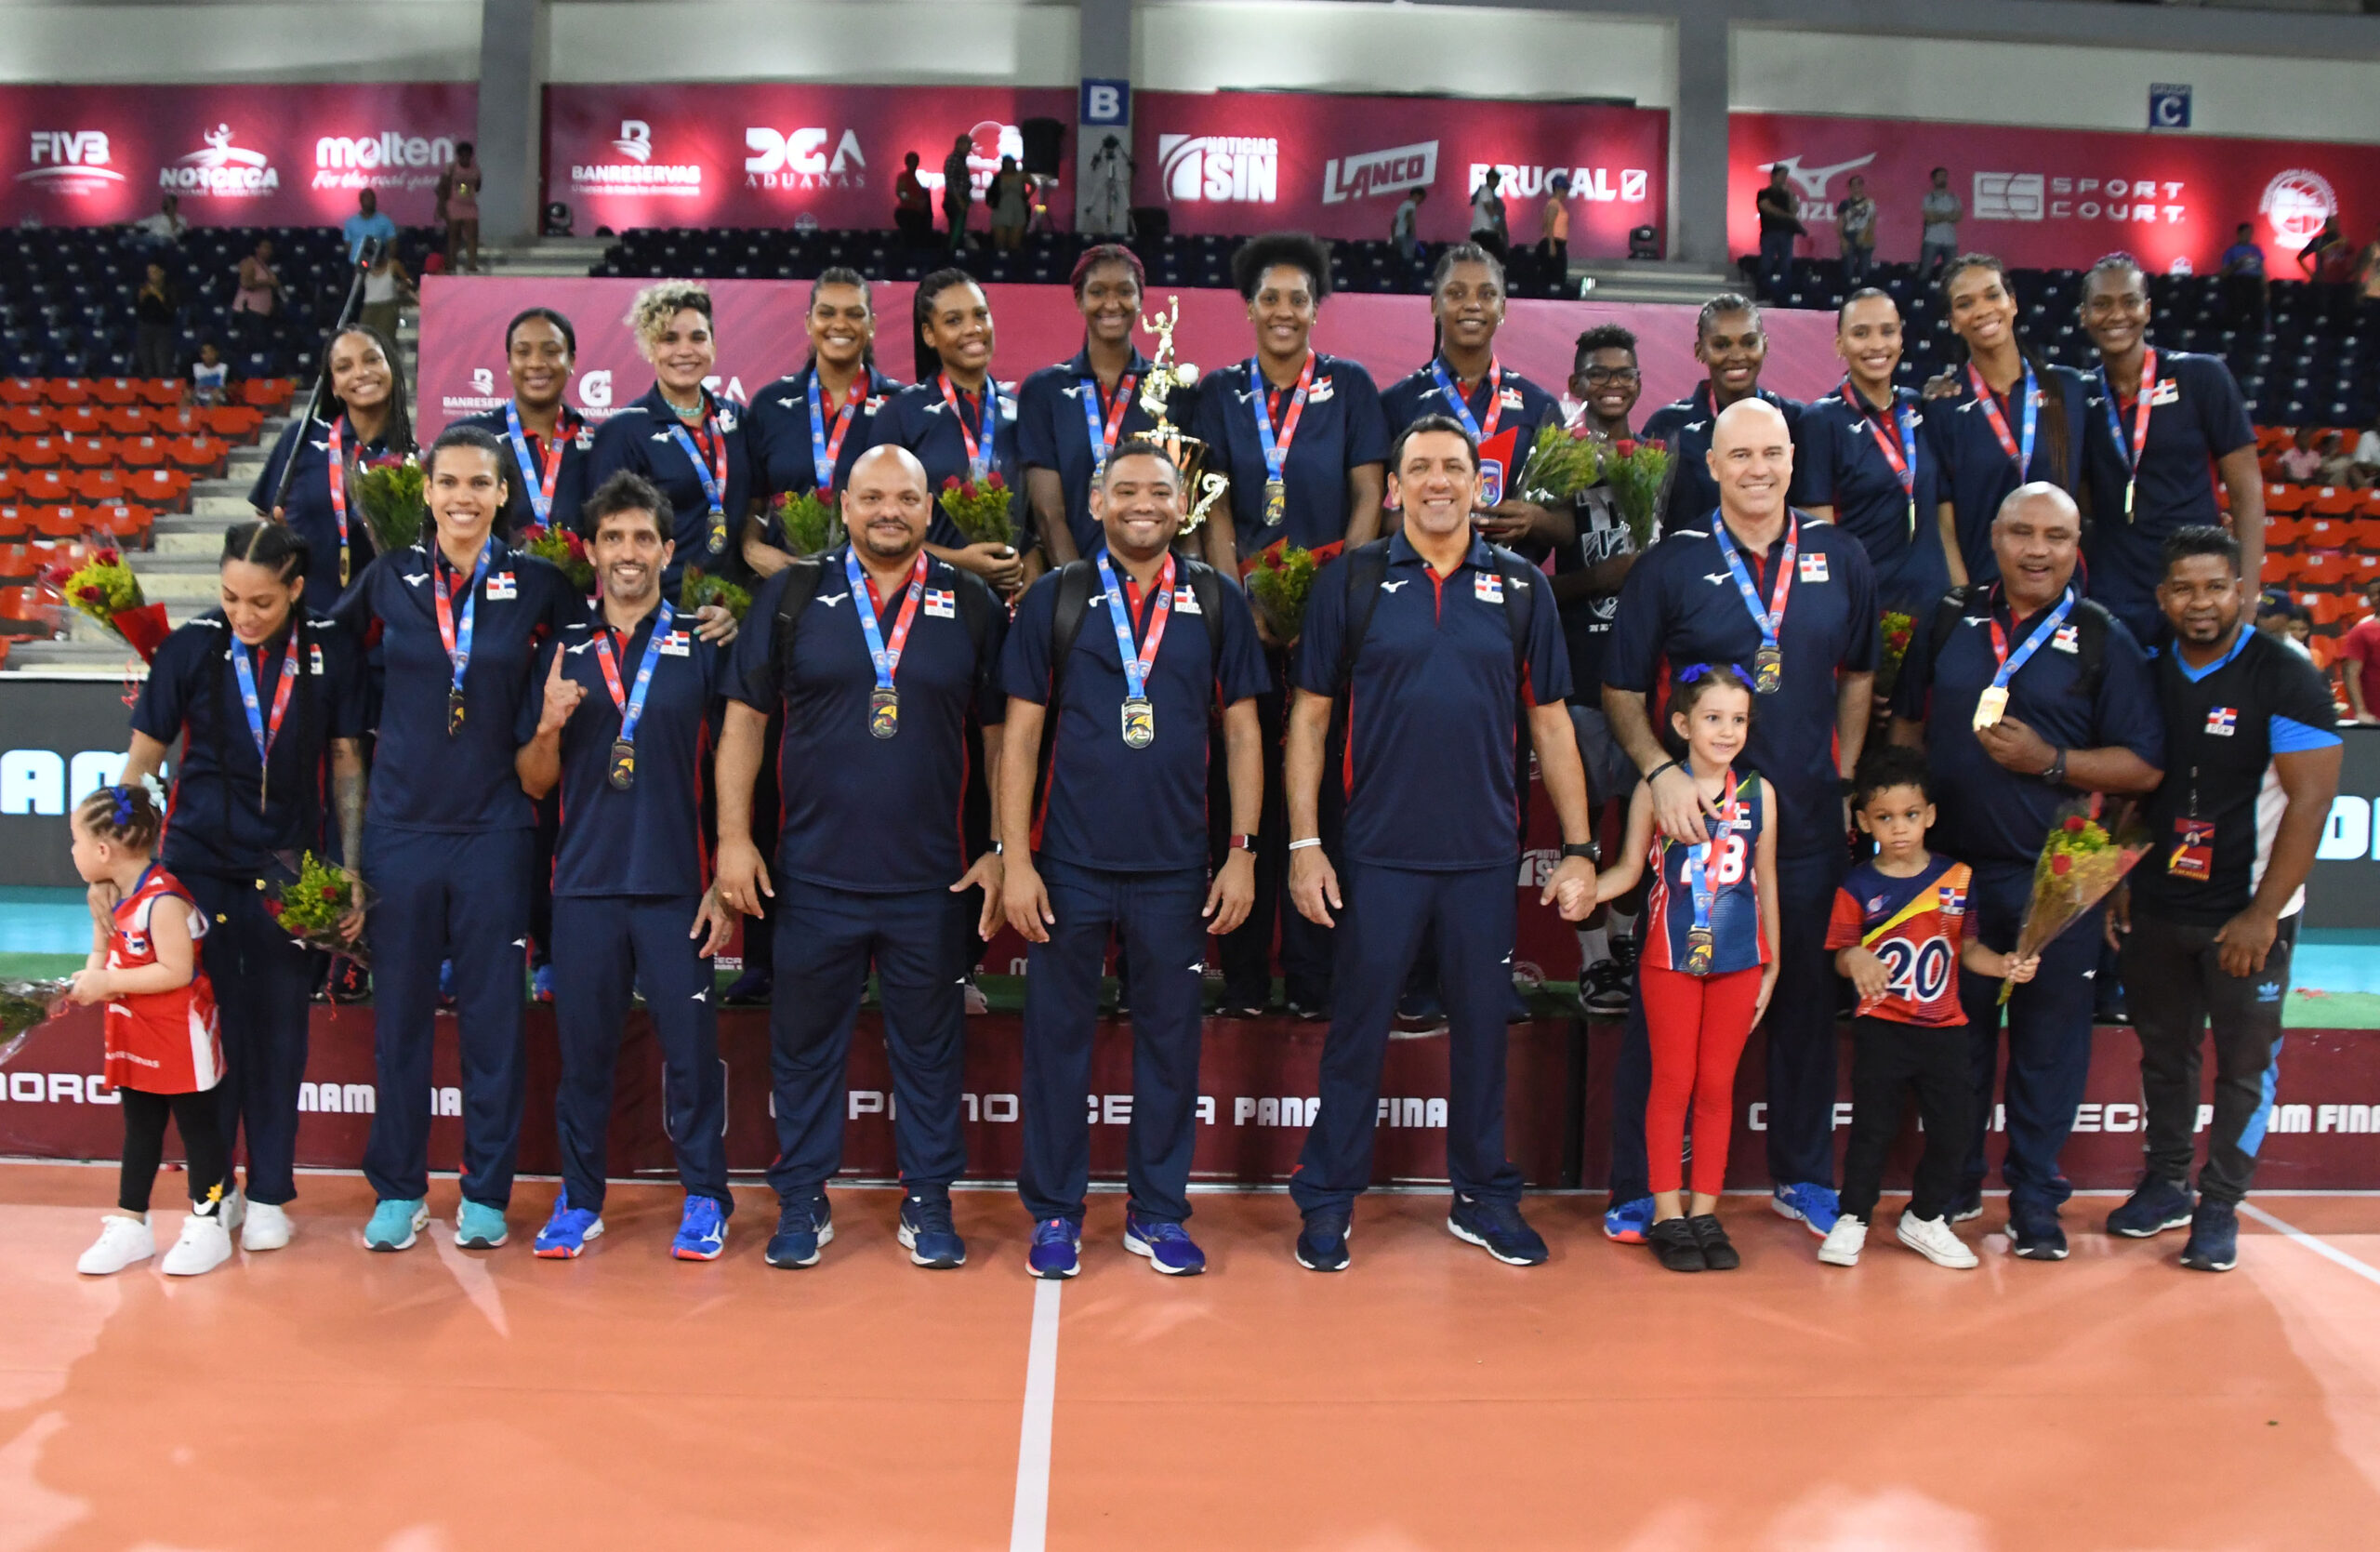 Dominican Republic takes the Gold